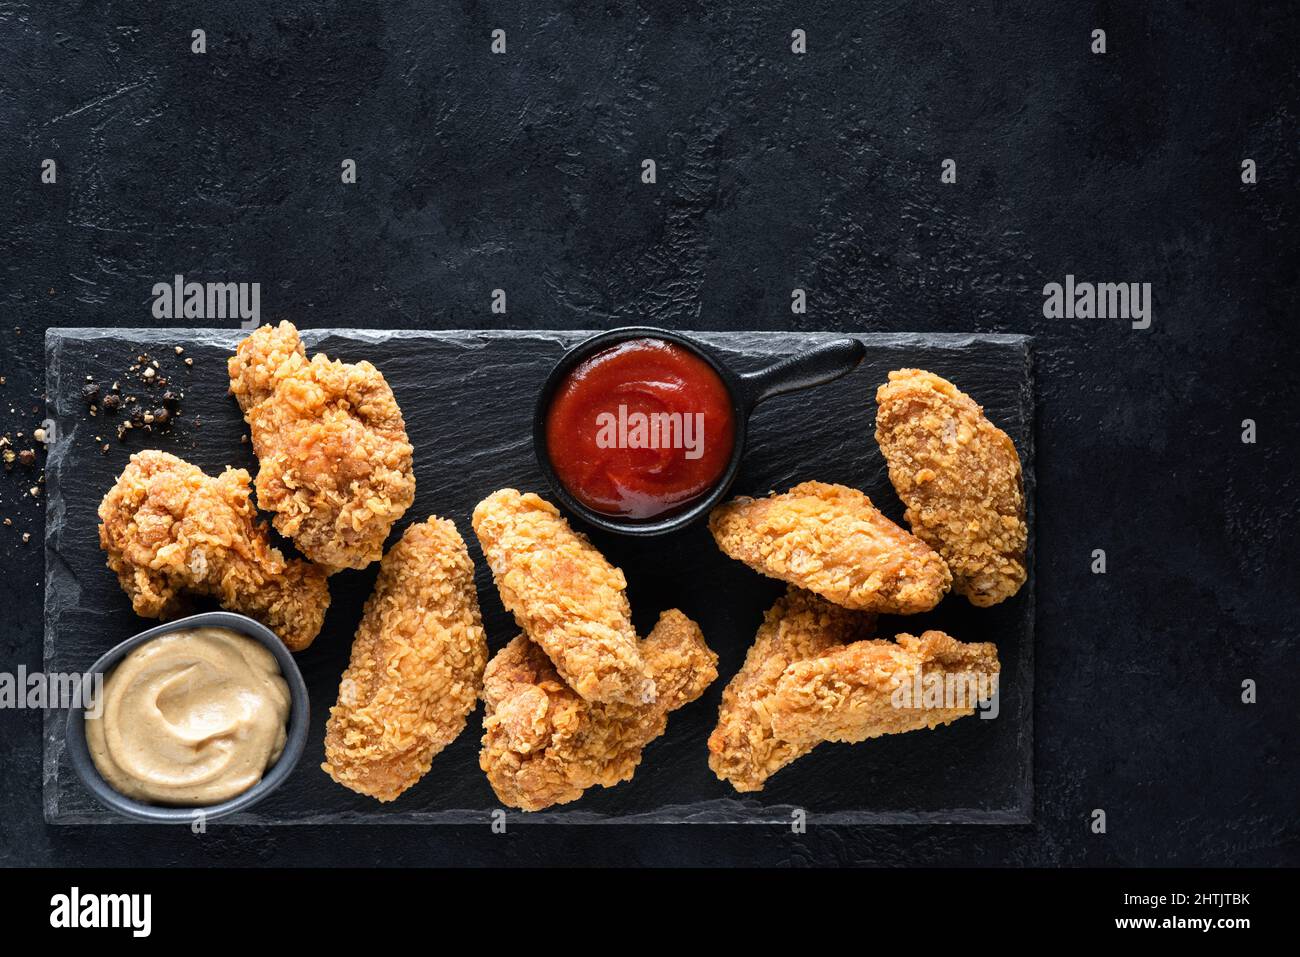 Fried chicken wings Kentucky style, crispy chicken served with sauces on black slate background. Top view copy space Stock Photo